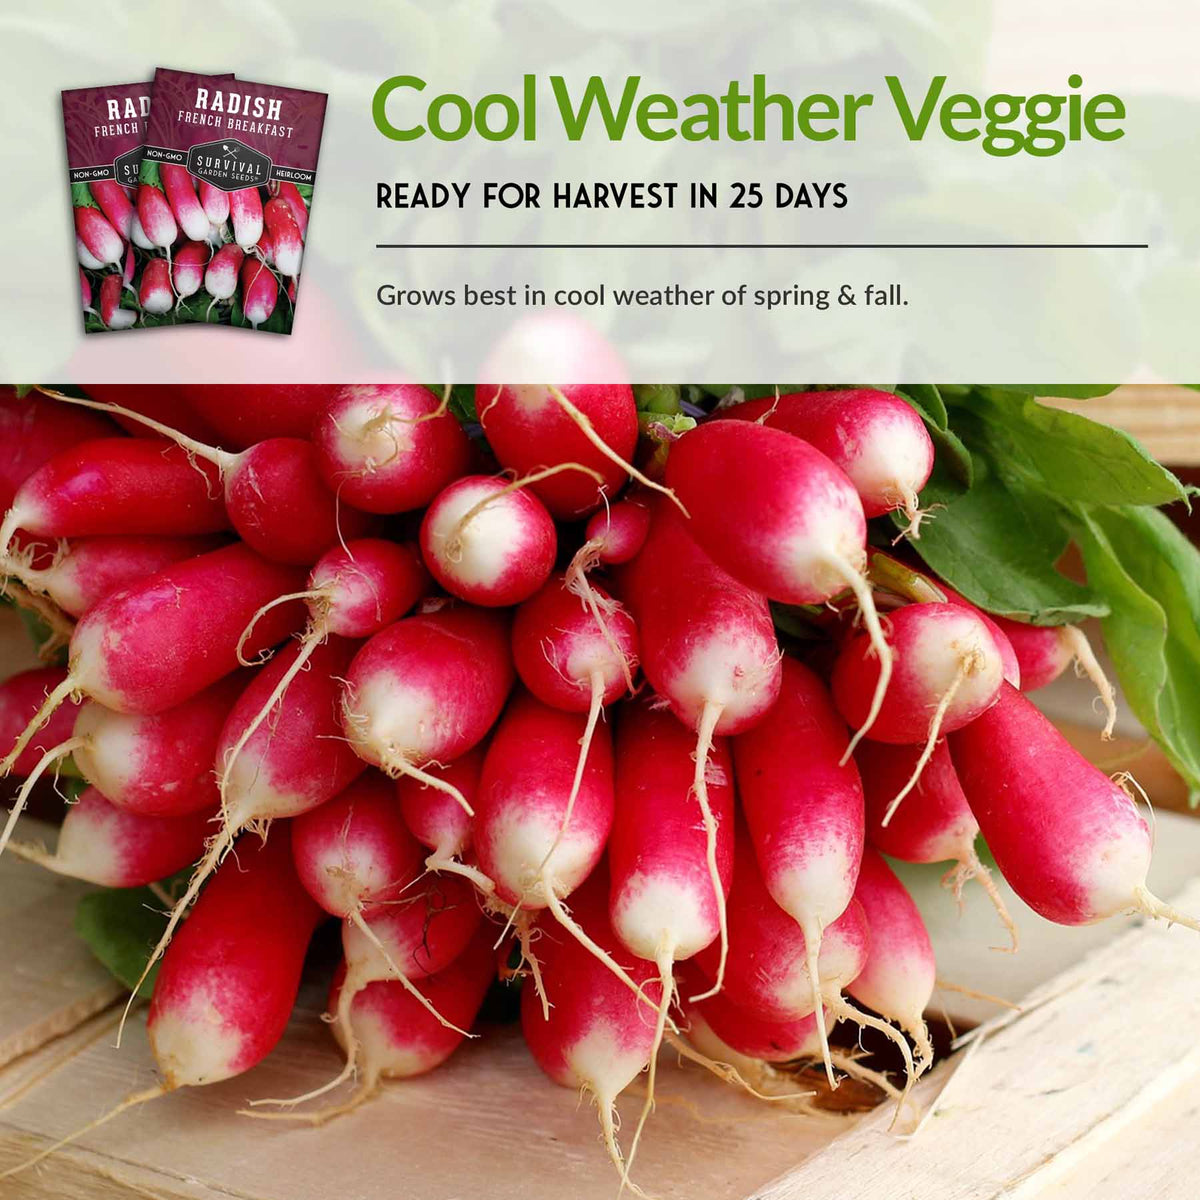 Radishes are a cold weather vegetable